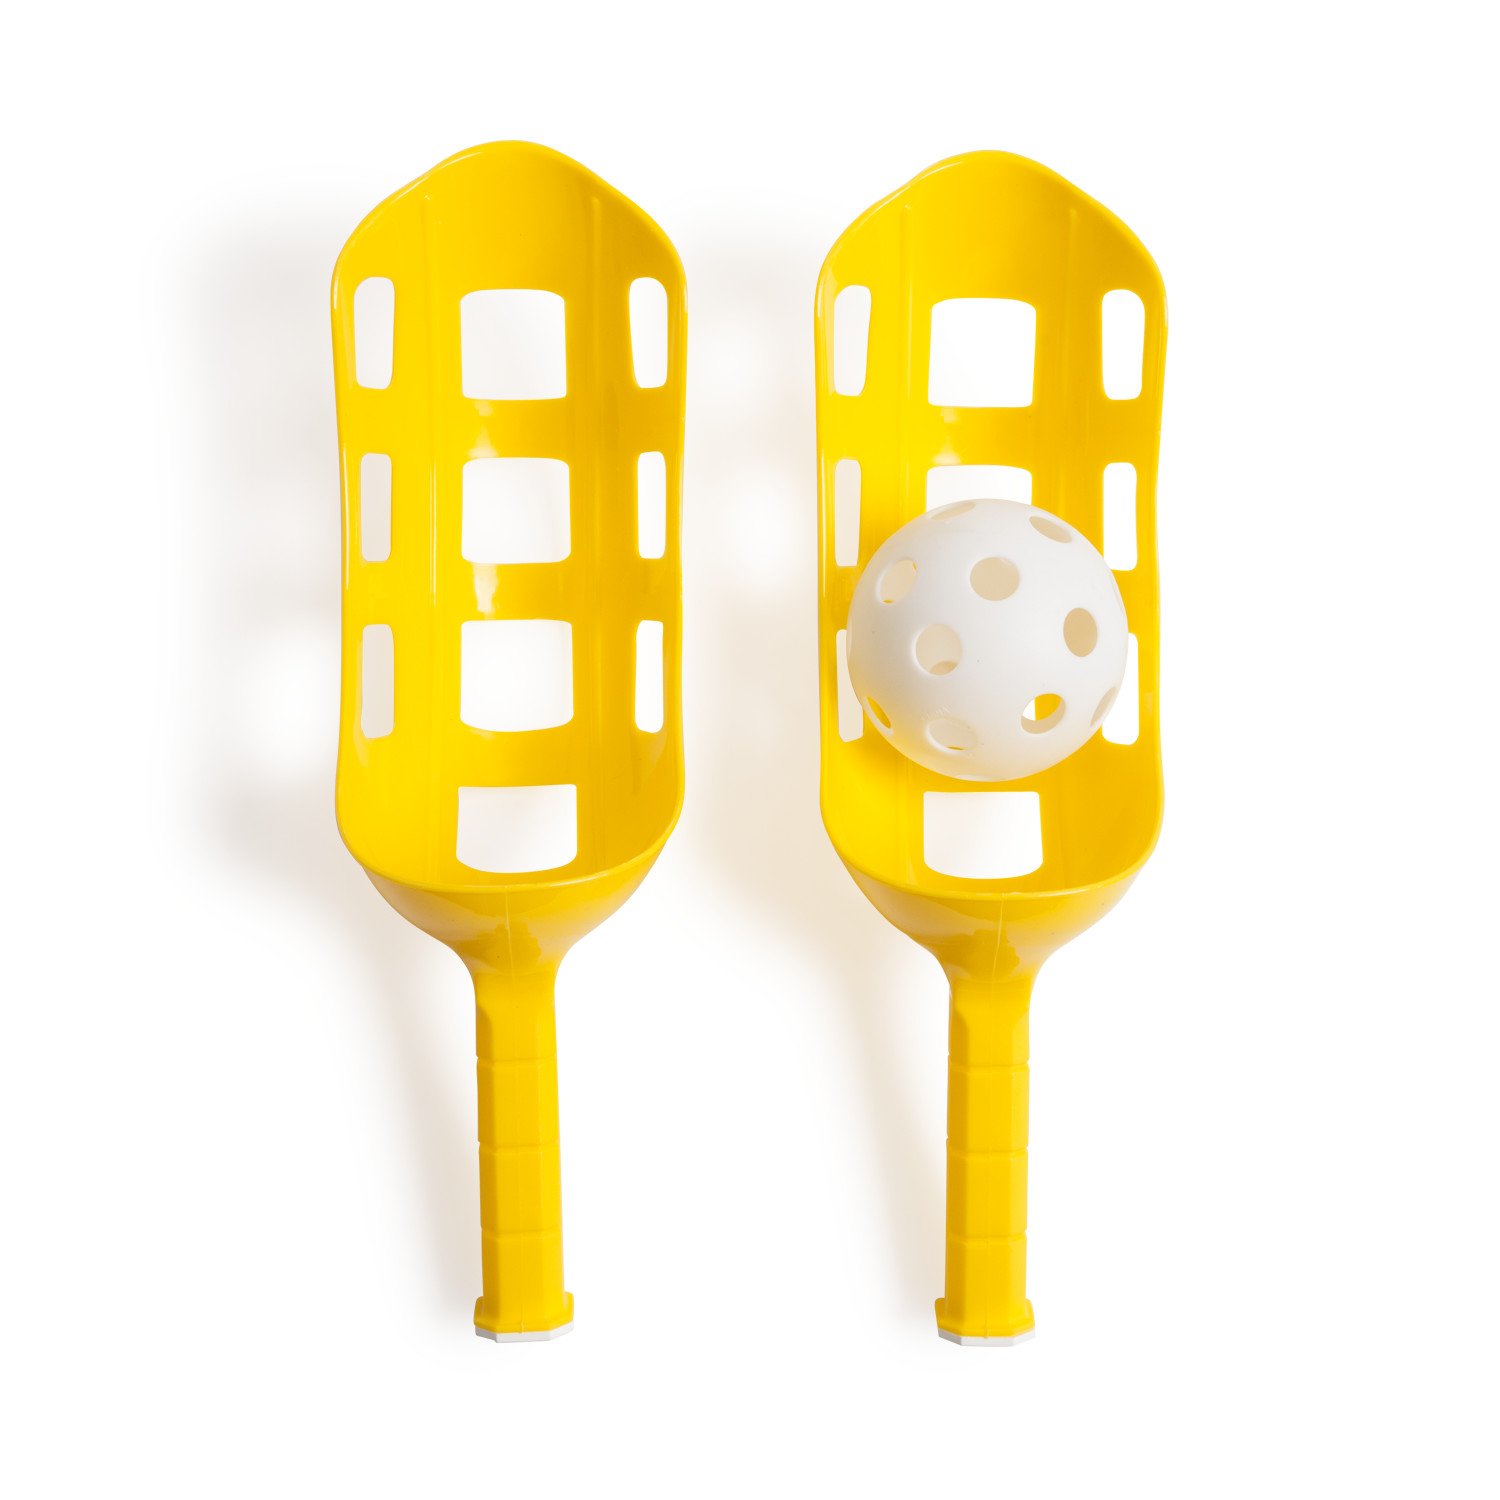 Champion Sports Scoop Ball Game: Classic Kids Outdoor Party Gear for Lawn, Camping & Beach